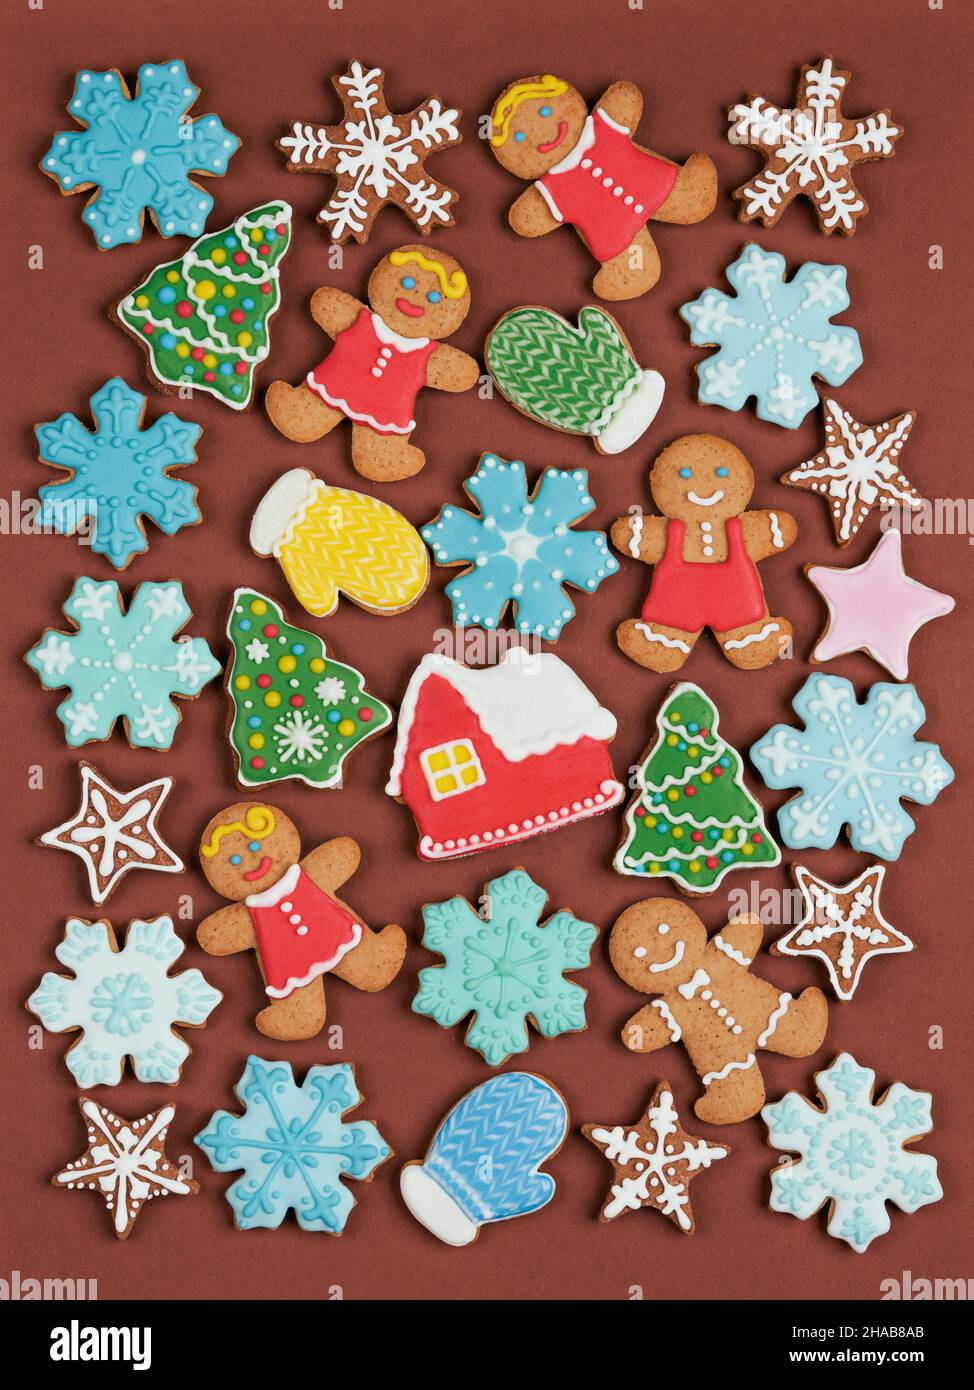 Christmas cookies set. Isolated ginger cookies with decoration on colored background. Sweet and delicious holiday gift. Ginger Man, Christmas tree, sn Stock Photo